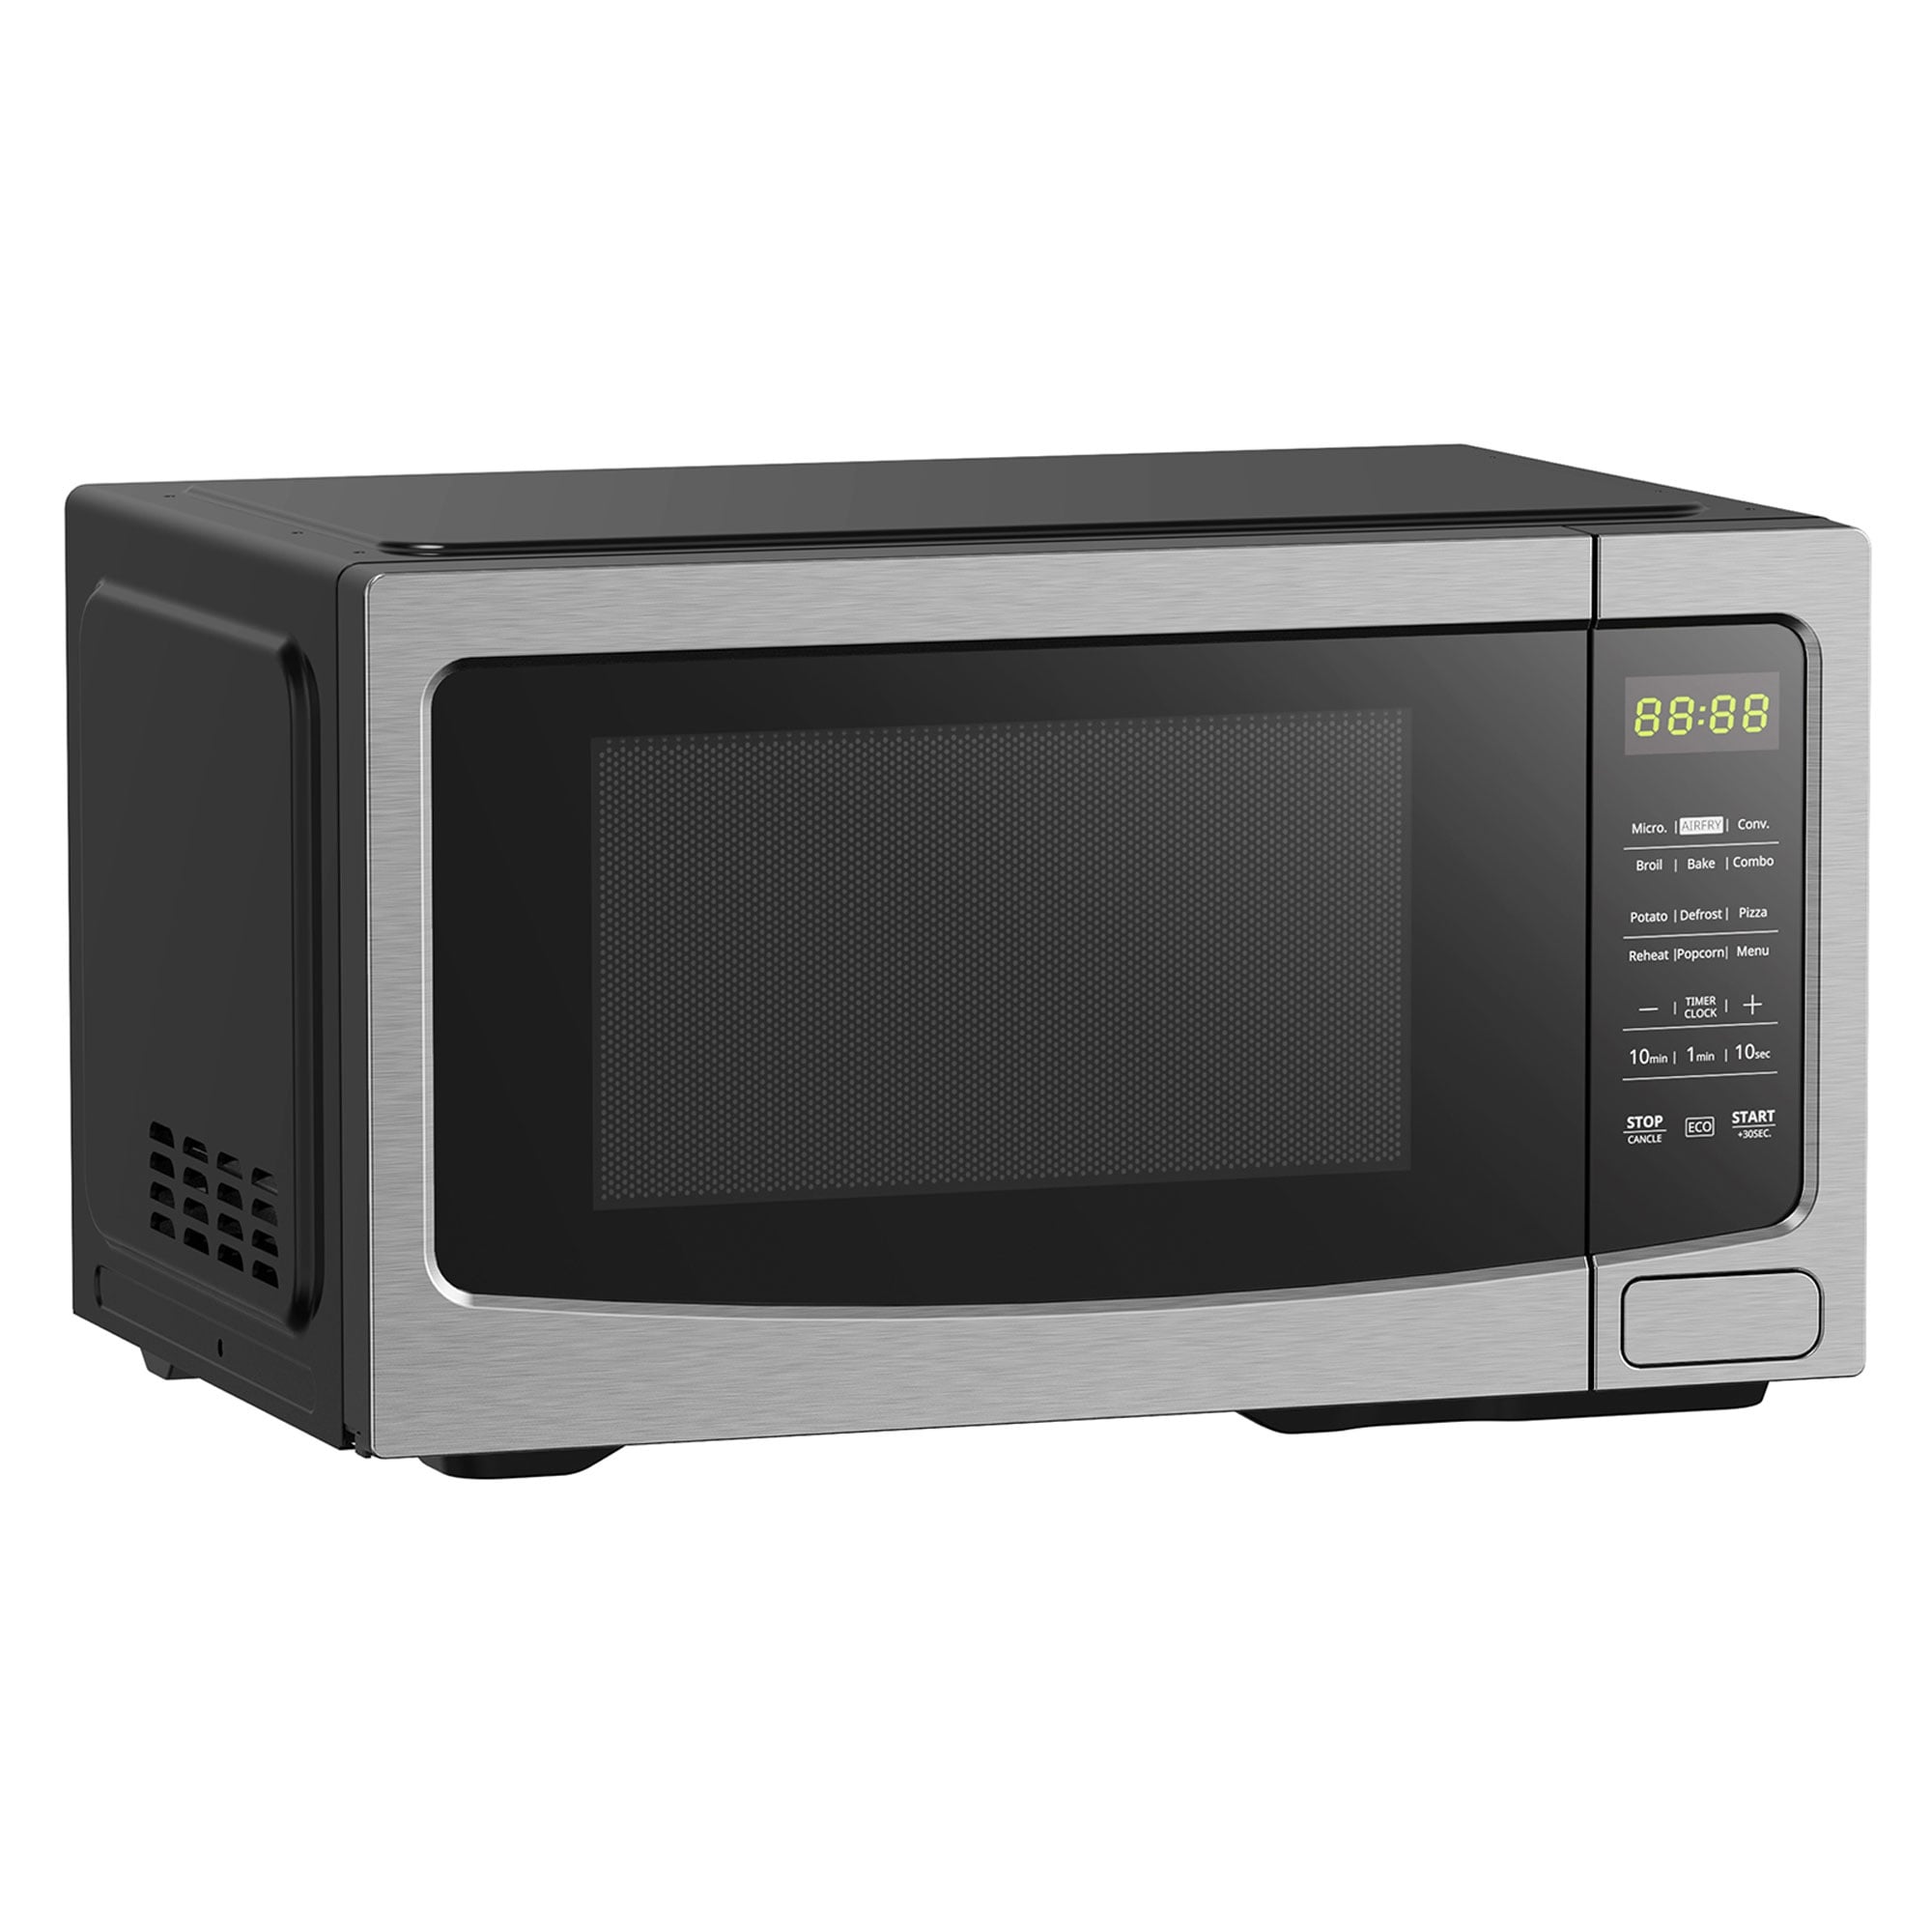 https://ak1.ostkcdn.com/images/products/is/images/direct/773d2acc1c35672480d573628143db8f93d90c76/Black-and-Decker-5-In-1-Countertop-Microwave-with-Air-Fryer%2C-Stainless-Steel.jpg